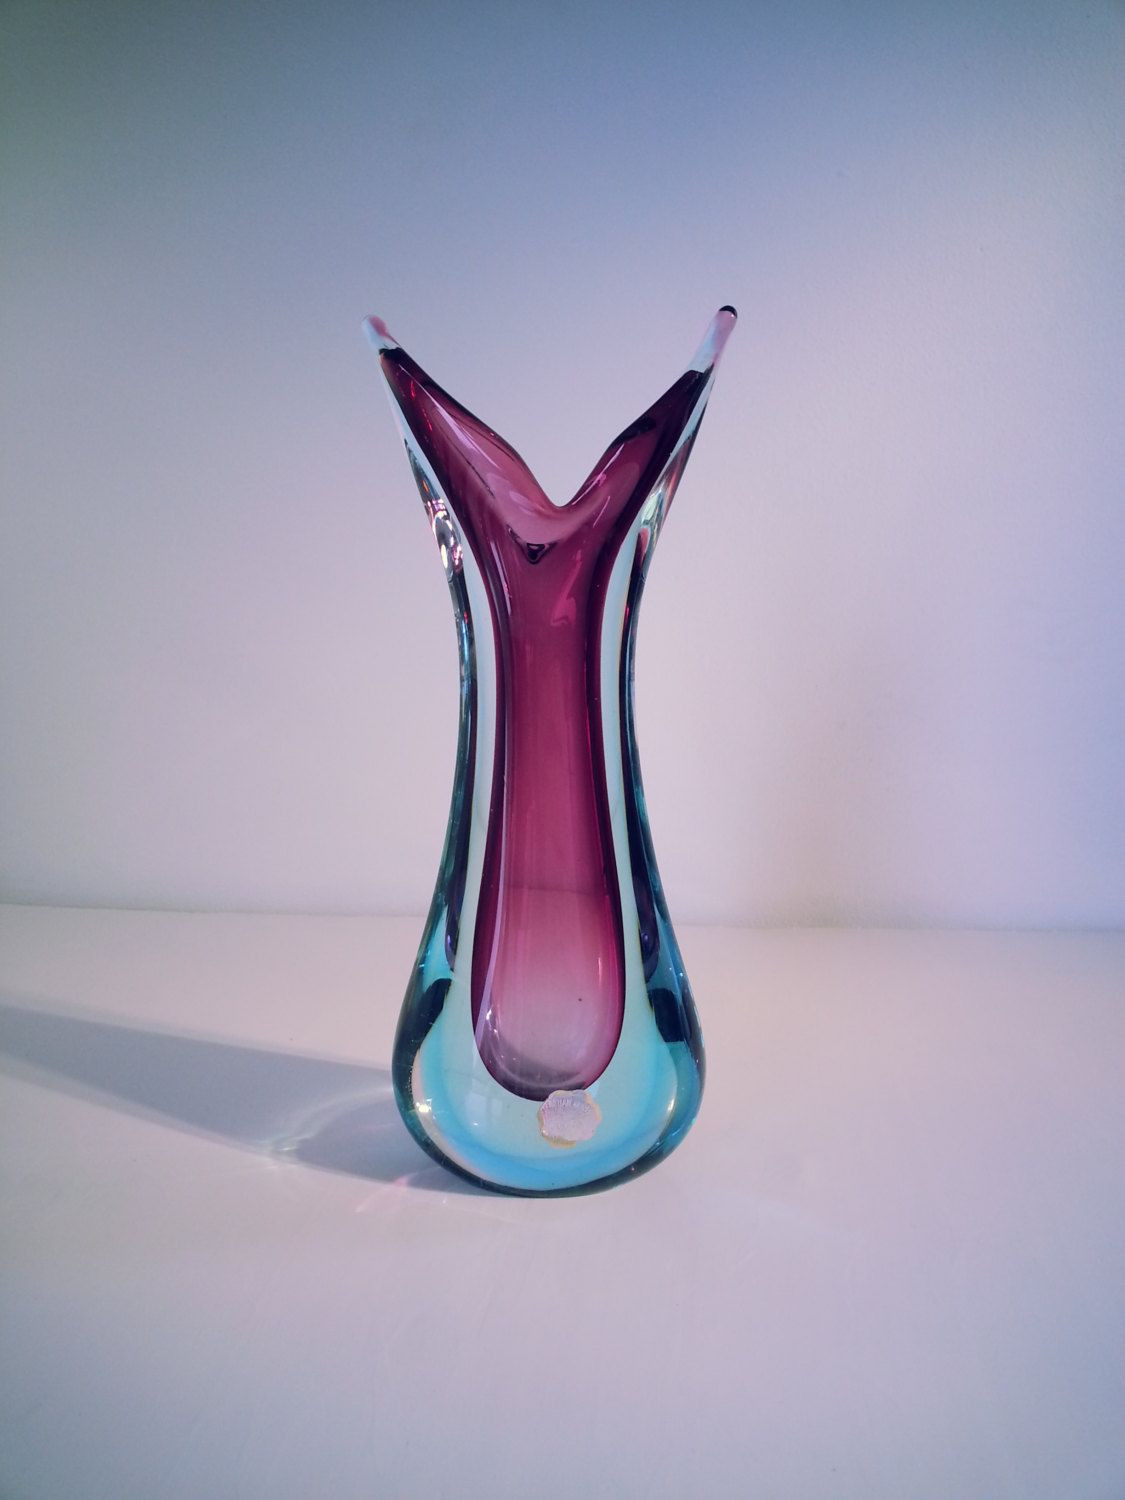 13 Spectacular Long Tall Glass Vases 2024 free download long tall glass vases of murano sommerso genuine venetian glass 1950s 1960s purple blue pertaining to murano sommerso genuine venetian glass 1950s 1960s purple blue glass vase pulled design 